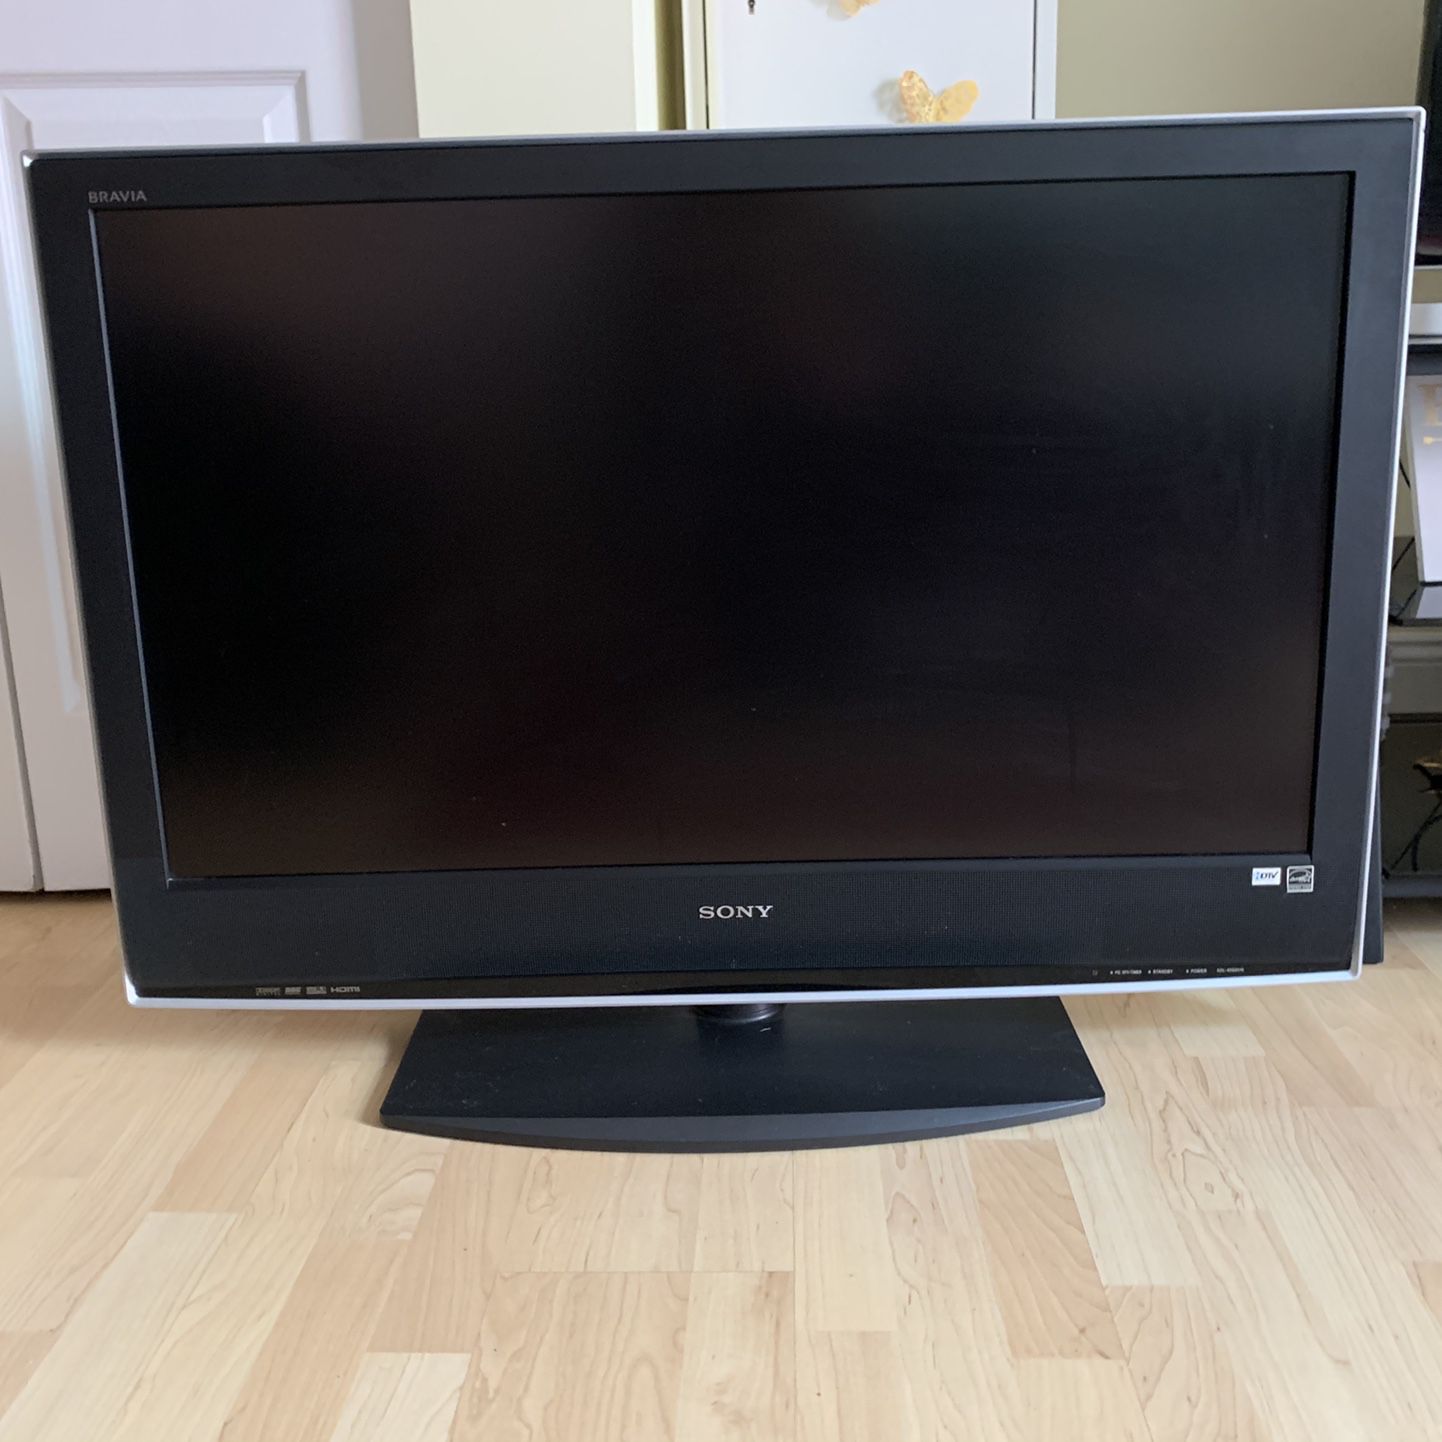 Must Go- Sony Bravia HDTV 42 Inch With Built-in Speakers